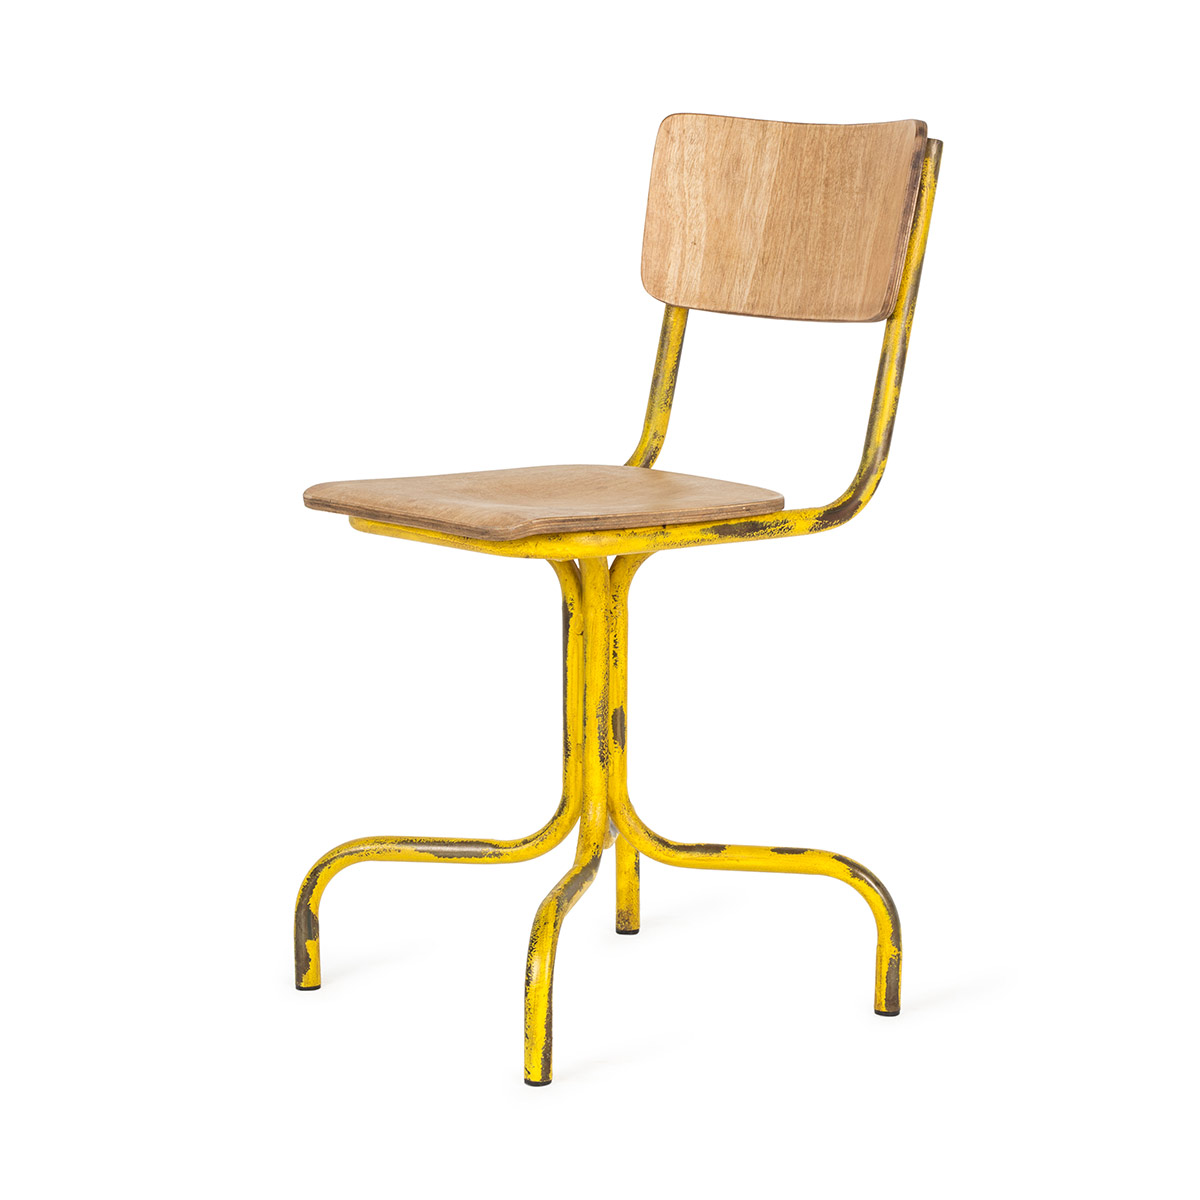 Surdy And Metal Caf Chairs Sold Online